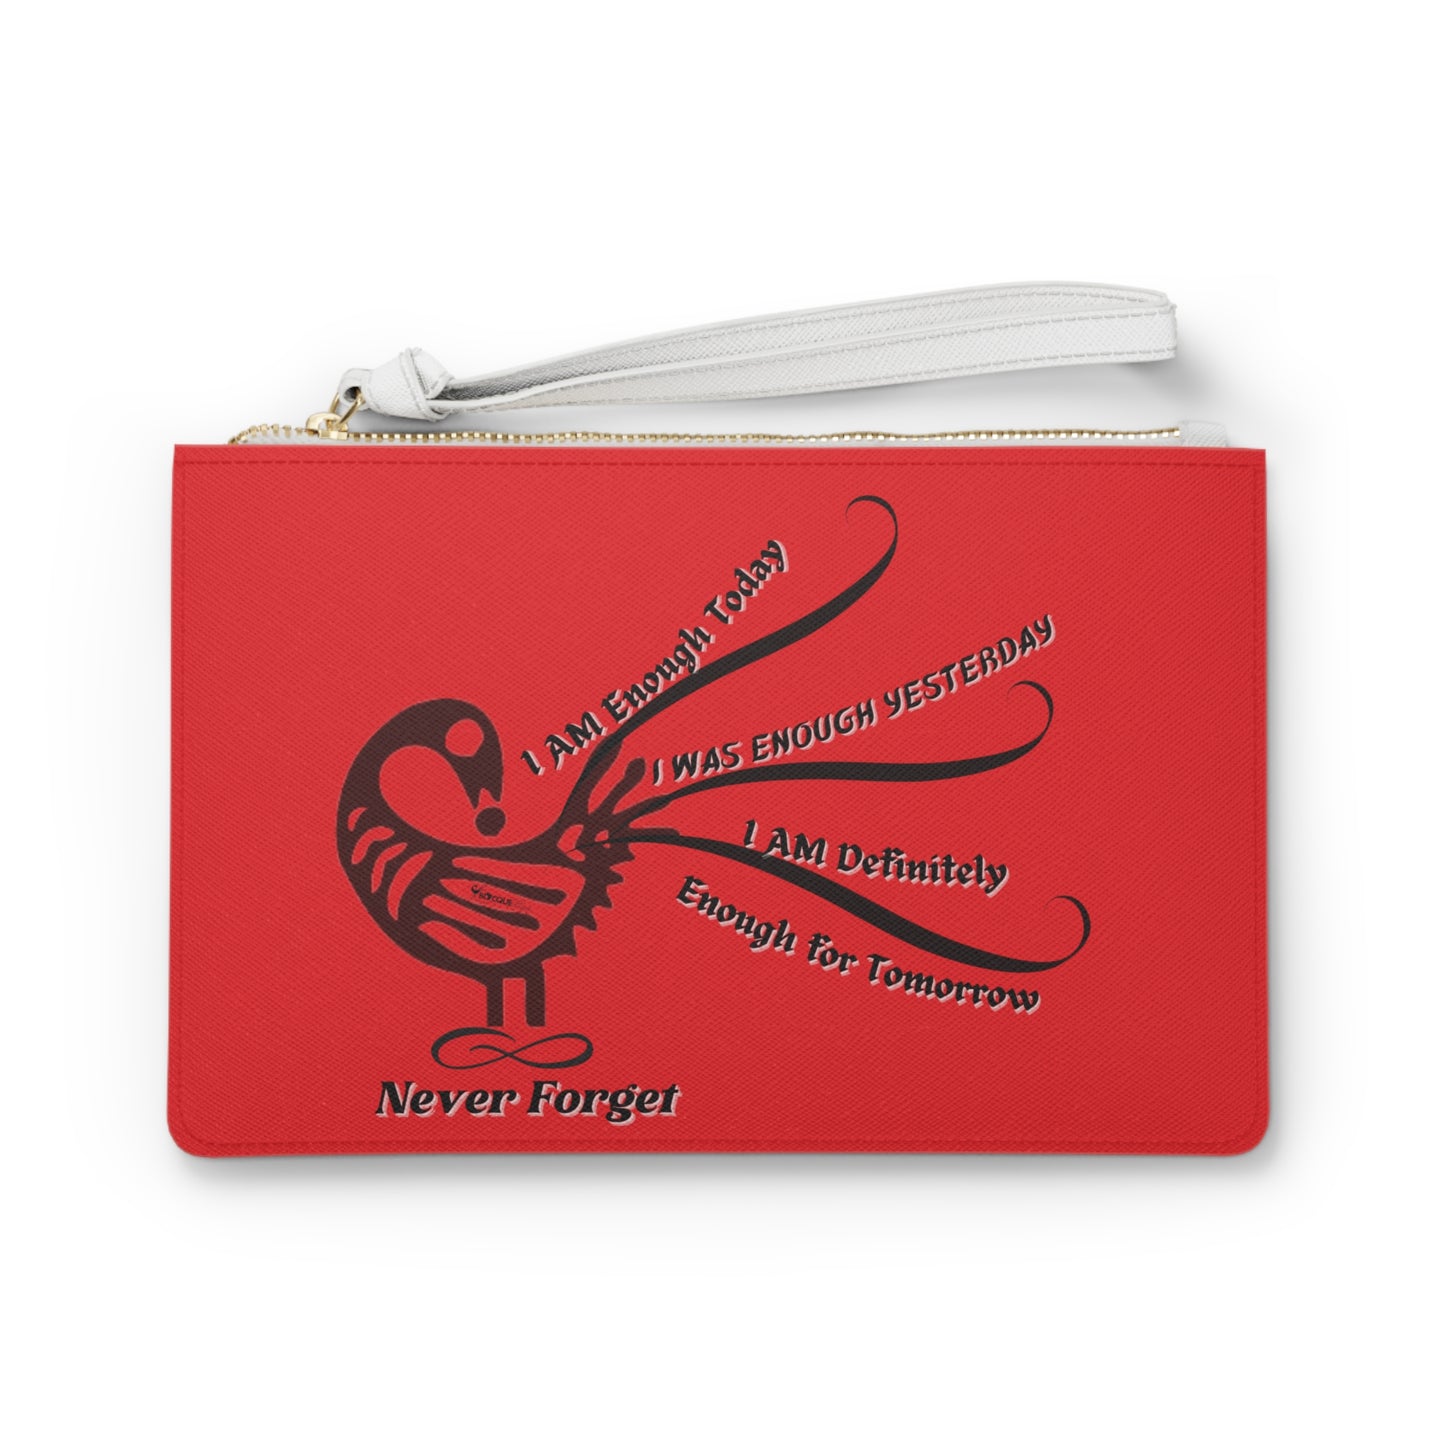 I AM MORE THAN ENOUGH-Empowering Positive Afrocentric Affirmation Vegan Leather Designer Clutch Bag-Red Clutch